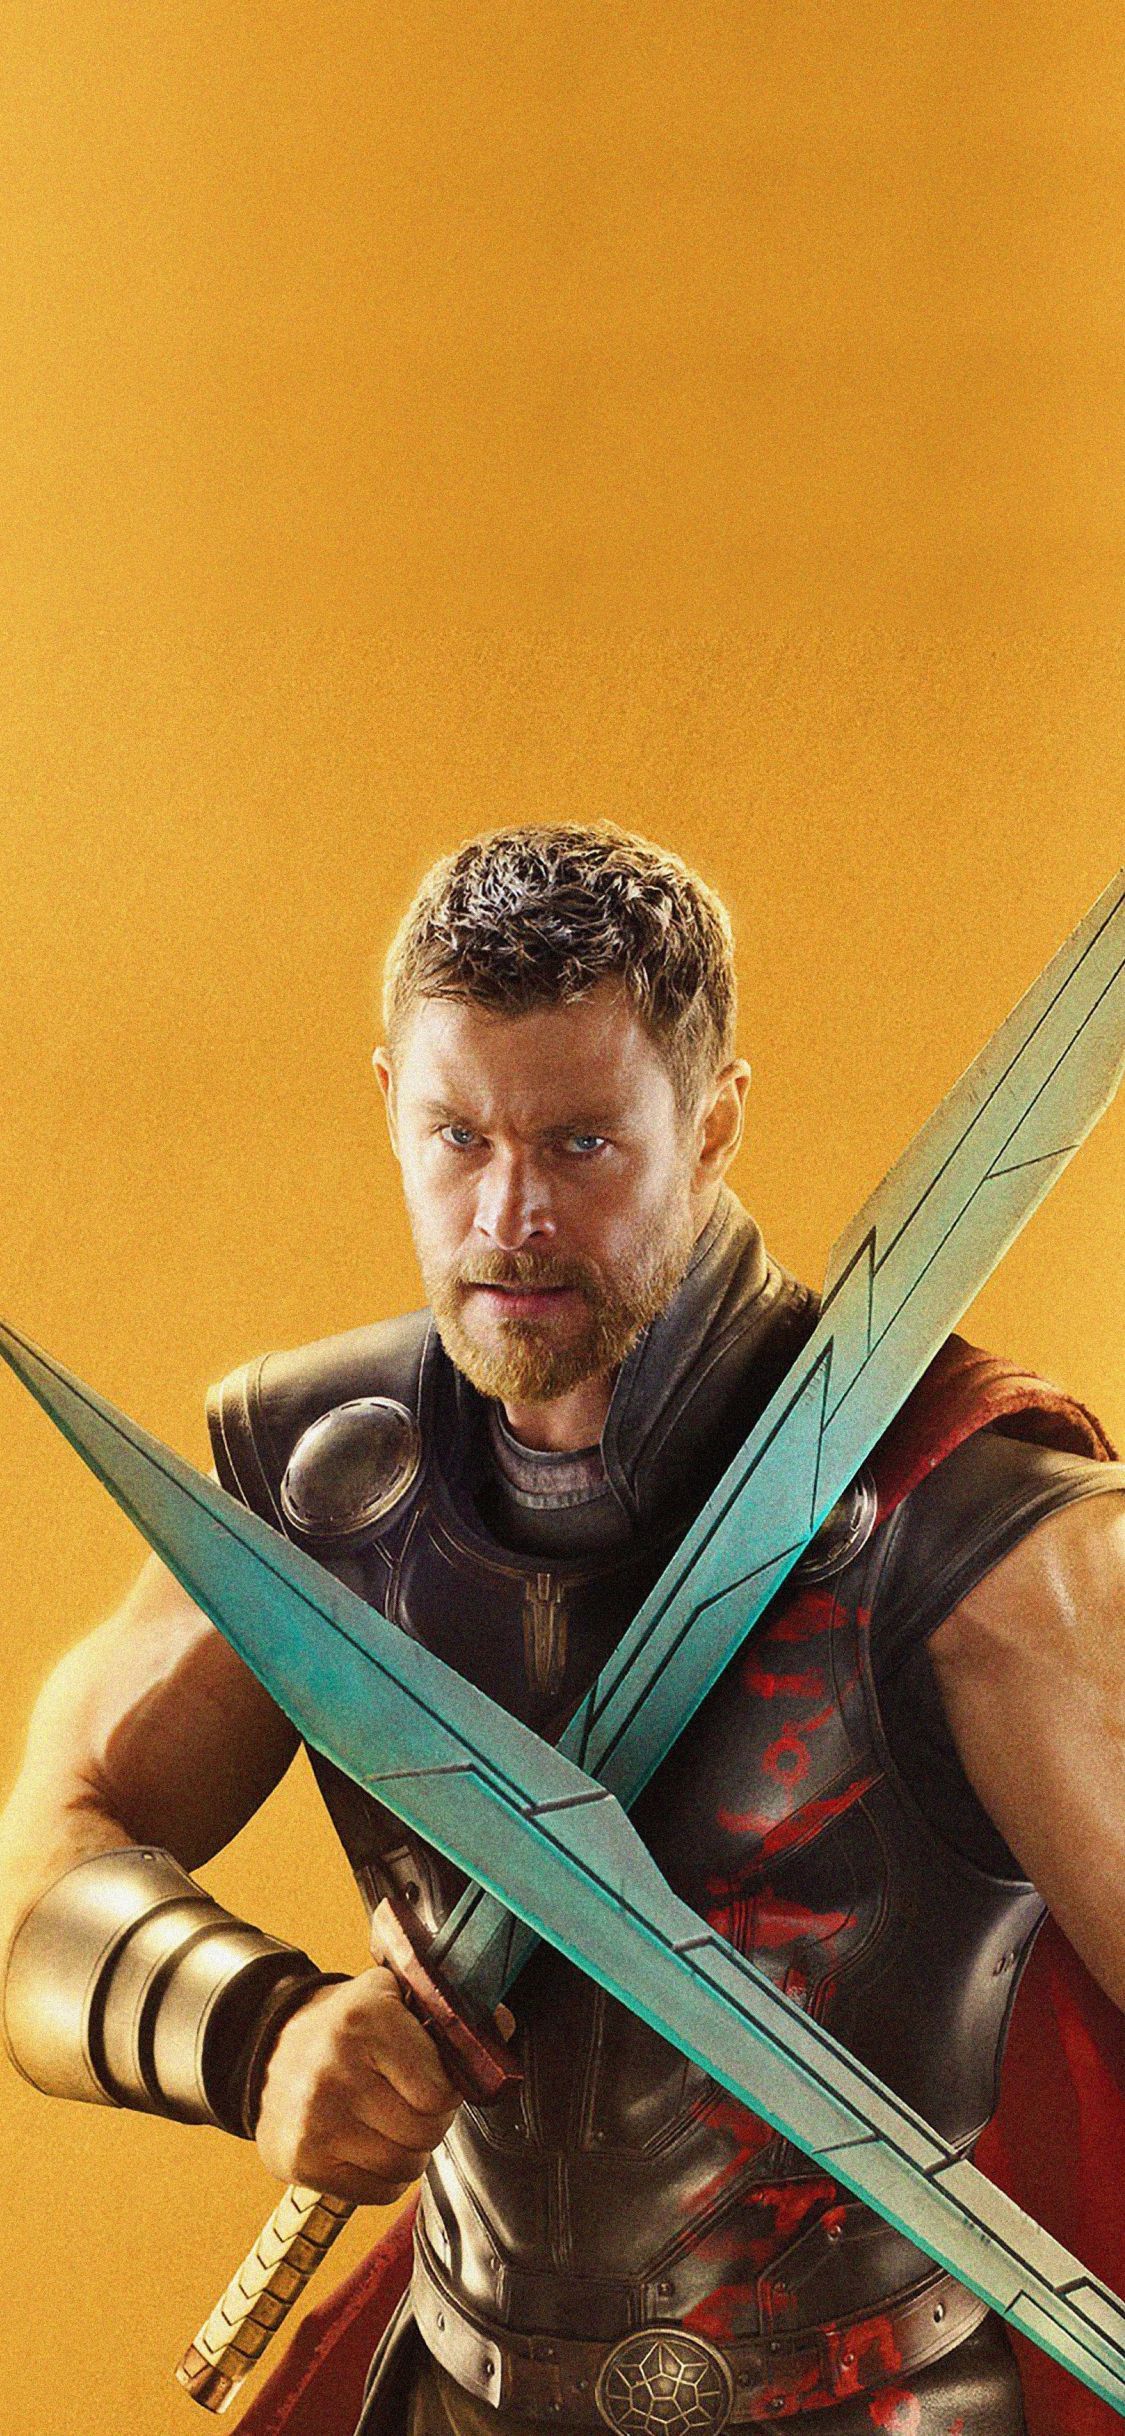 Wallpaper iPhone Thor Ragnarok with high-resolution 1080x1920 pixel. You can use this wallpaper for your iPhone 5, 6, 7, 8, X, XS, XR backgrounds, Mobile Screensaver, or iPad Lock Screen - Thor